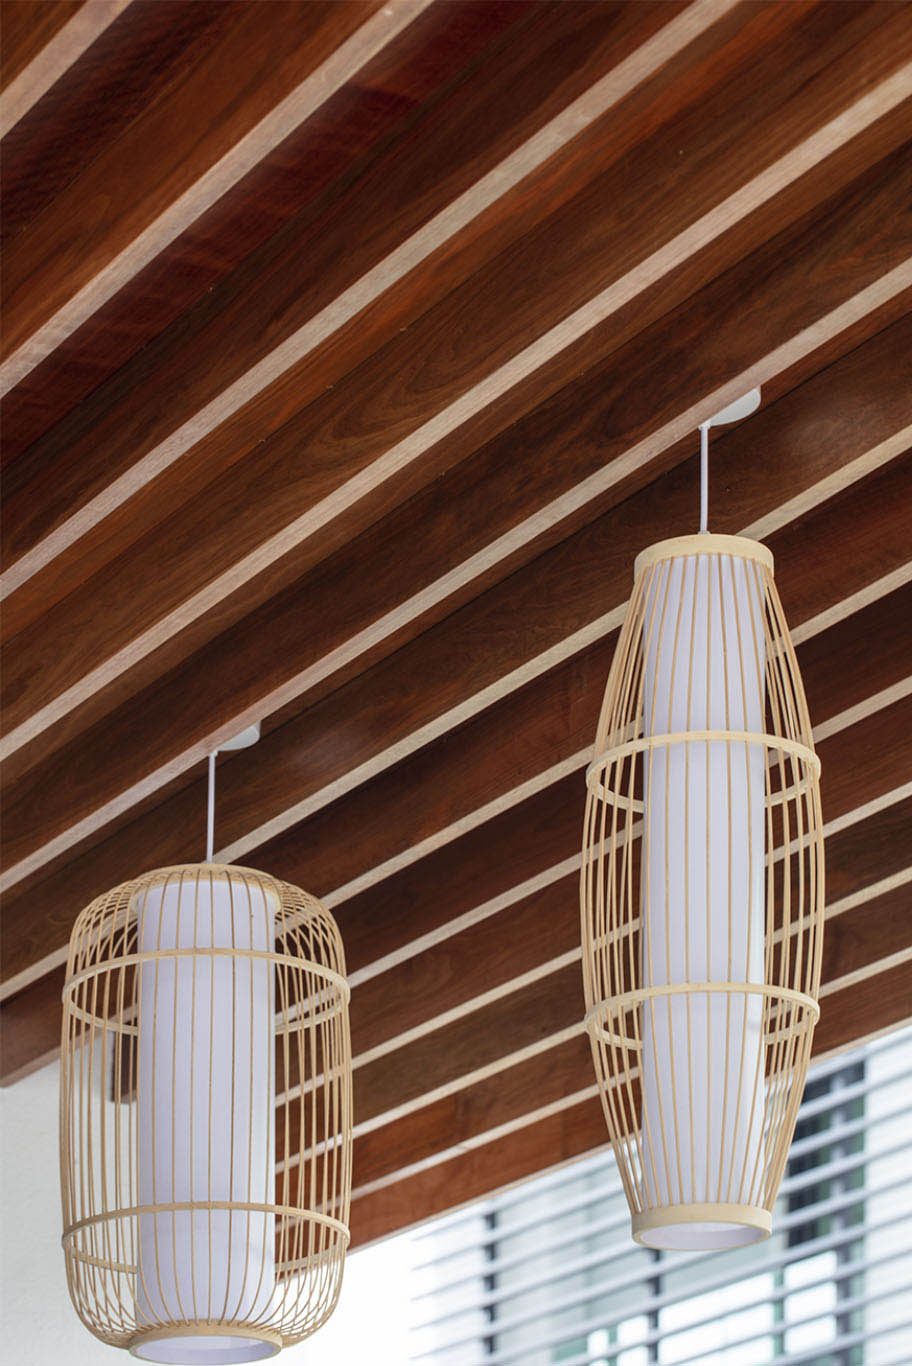 MIEUX The White Royale wooden strips outside ceiling with minimalist hanging lights mieux interior design